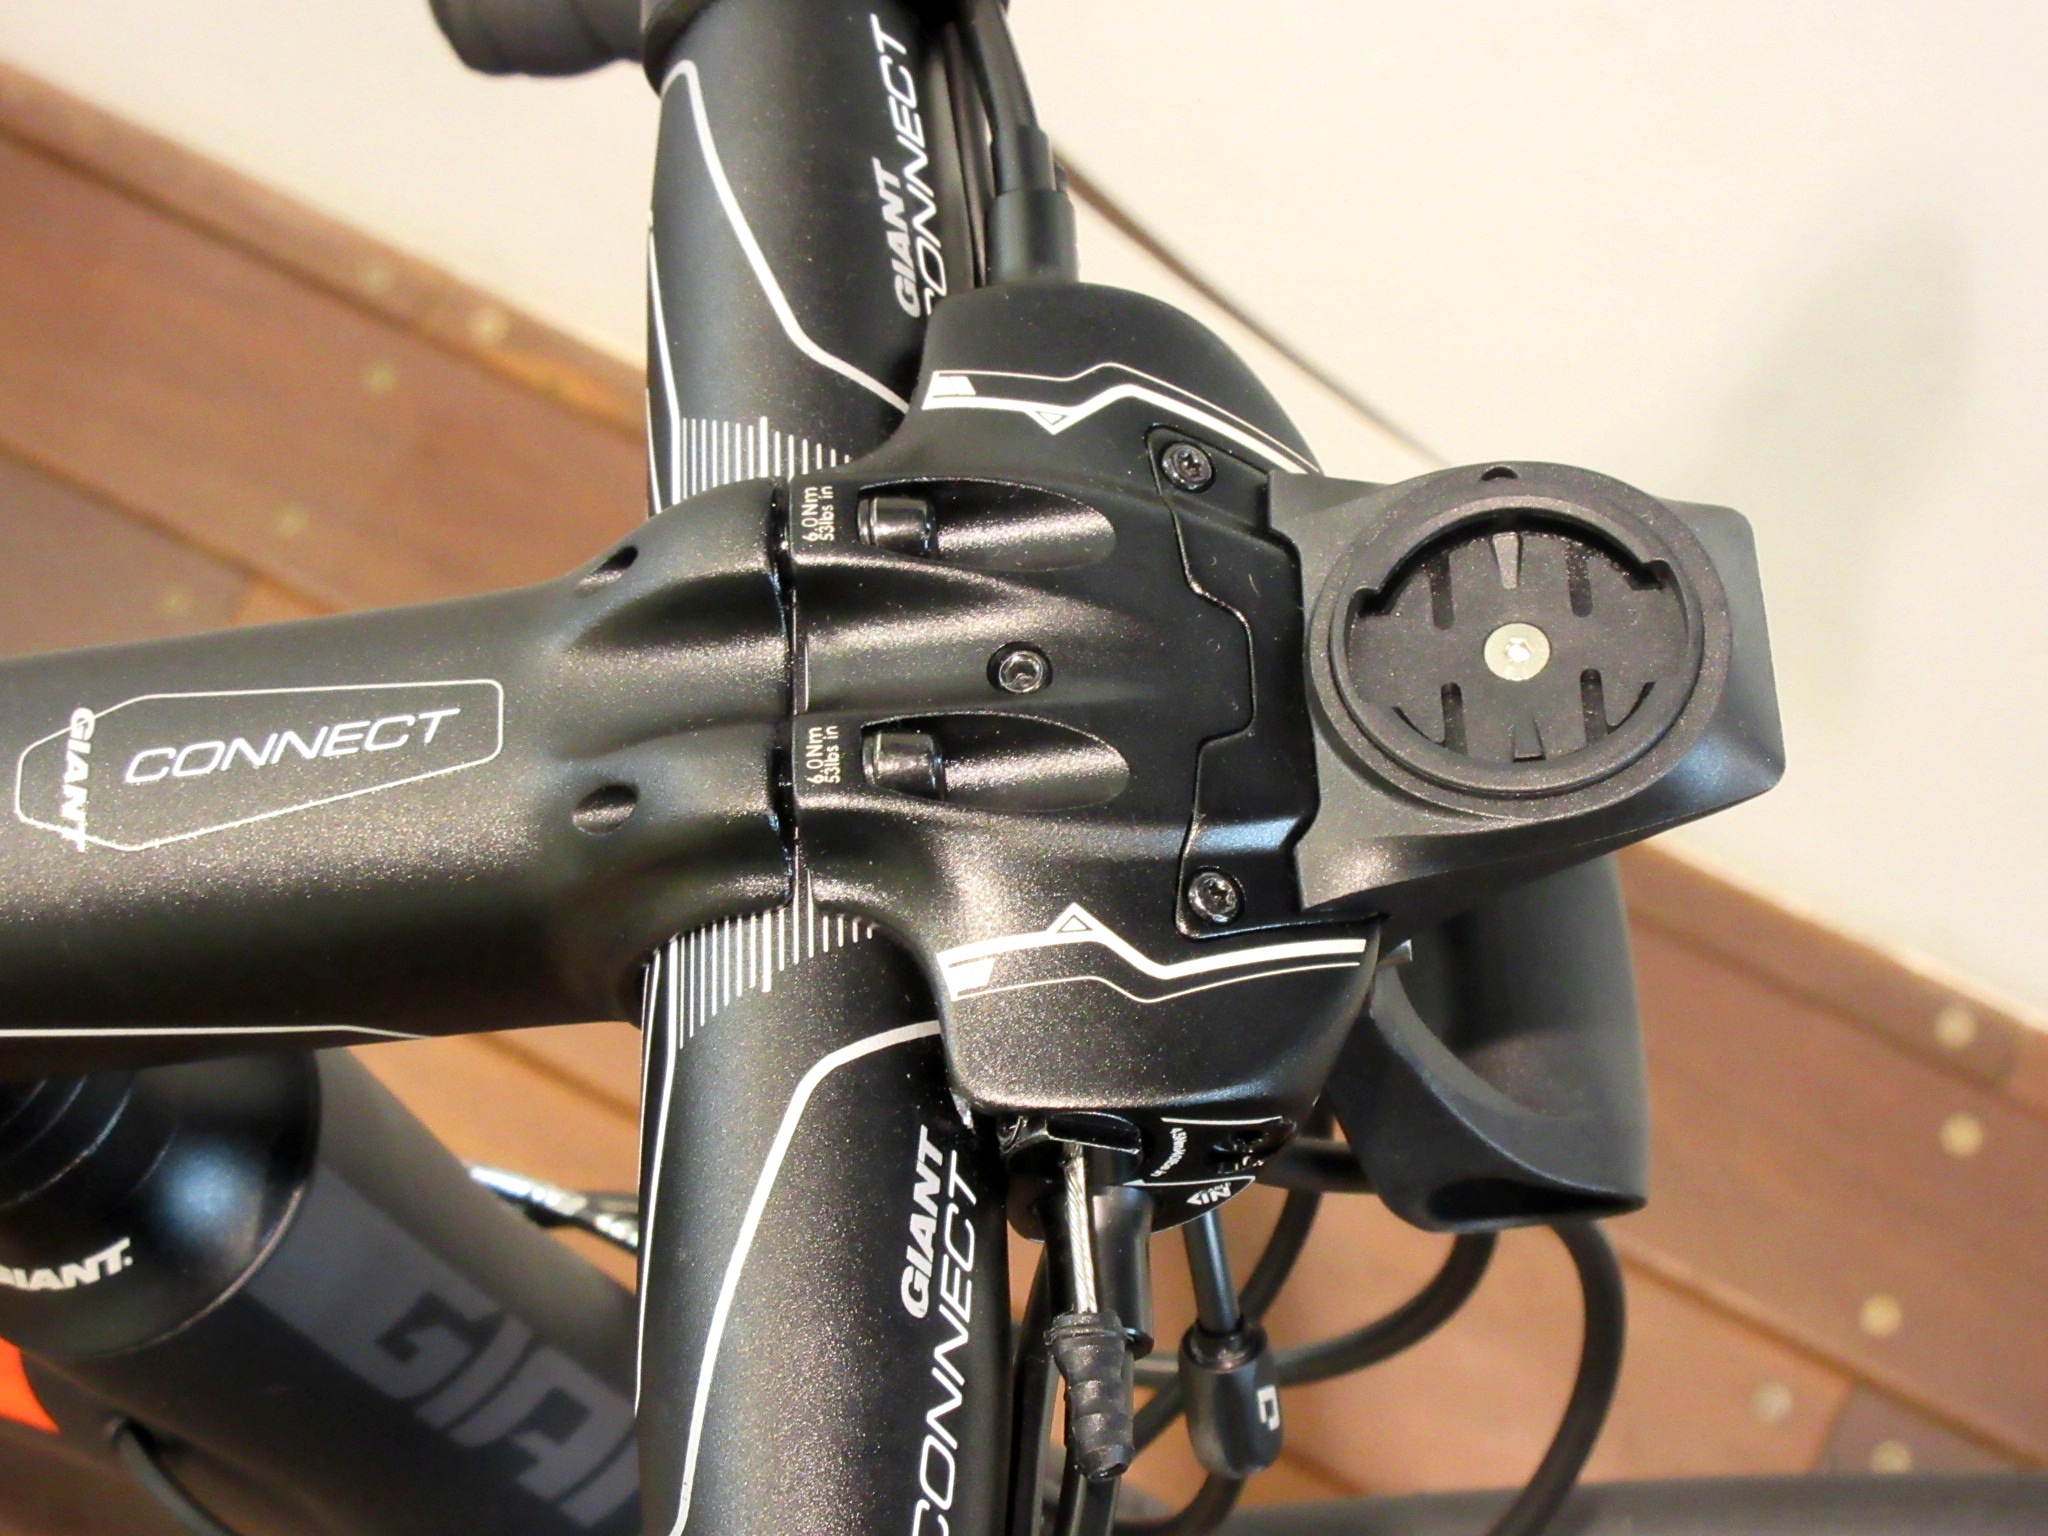 giant conduct hydraulic disc brakes